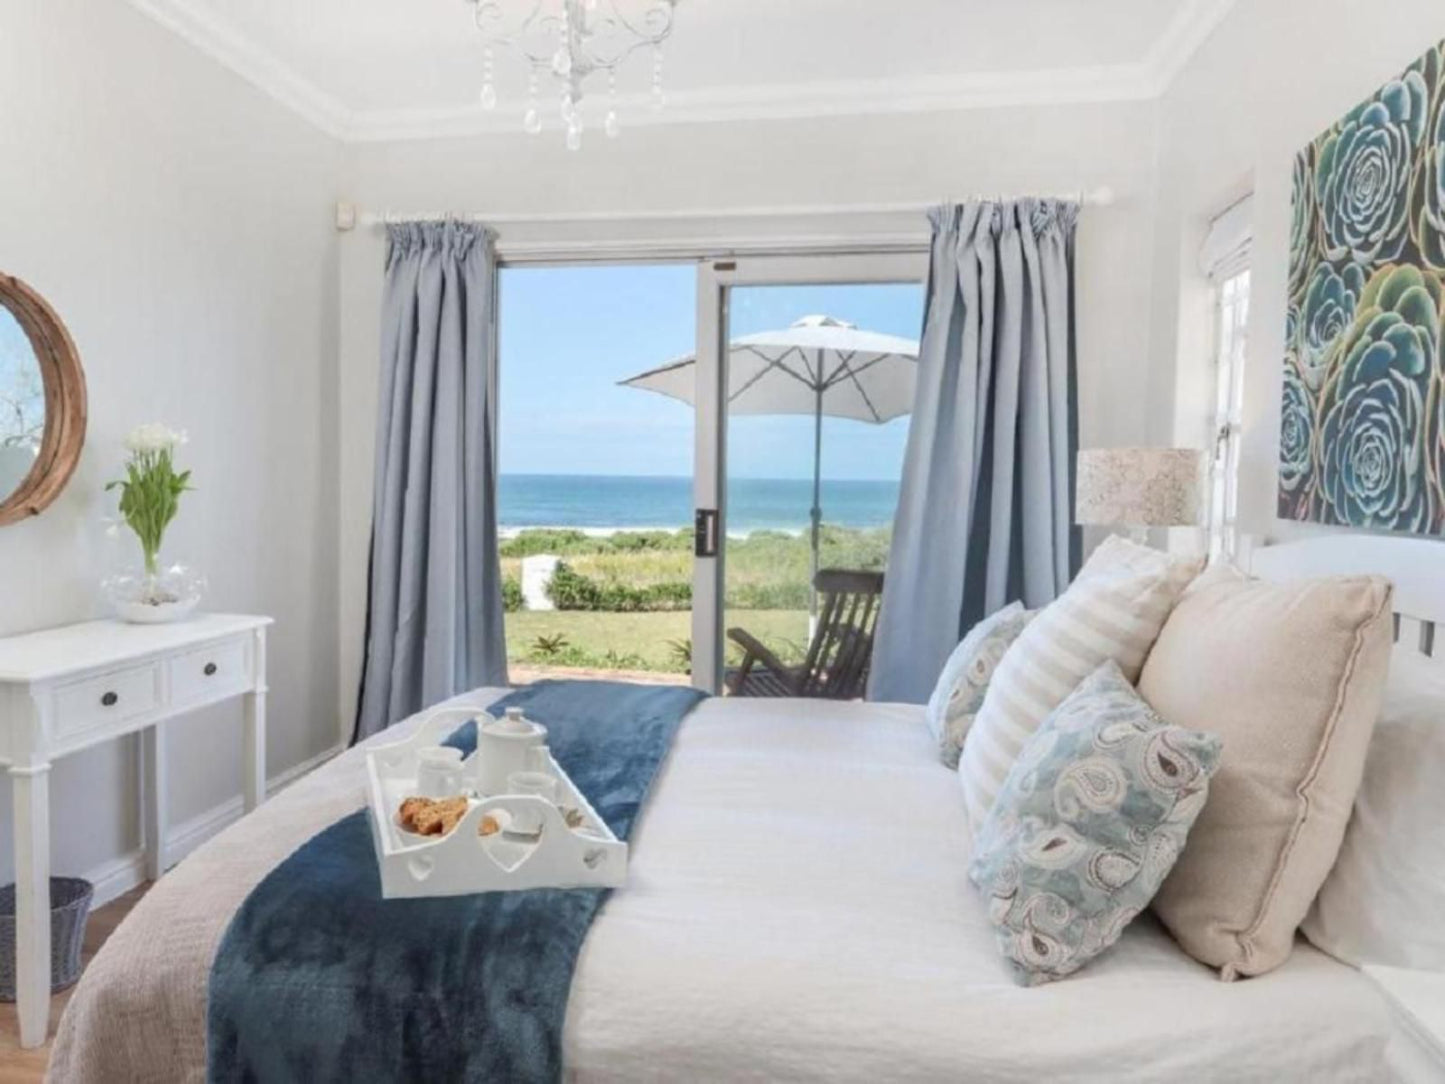 Shores Edge Cottage And Seapearl Ocean Front Villa Onrus Hermanus Western Cape South Africa Unsaturated, Bedroom